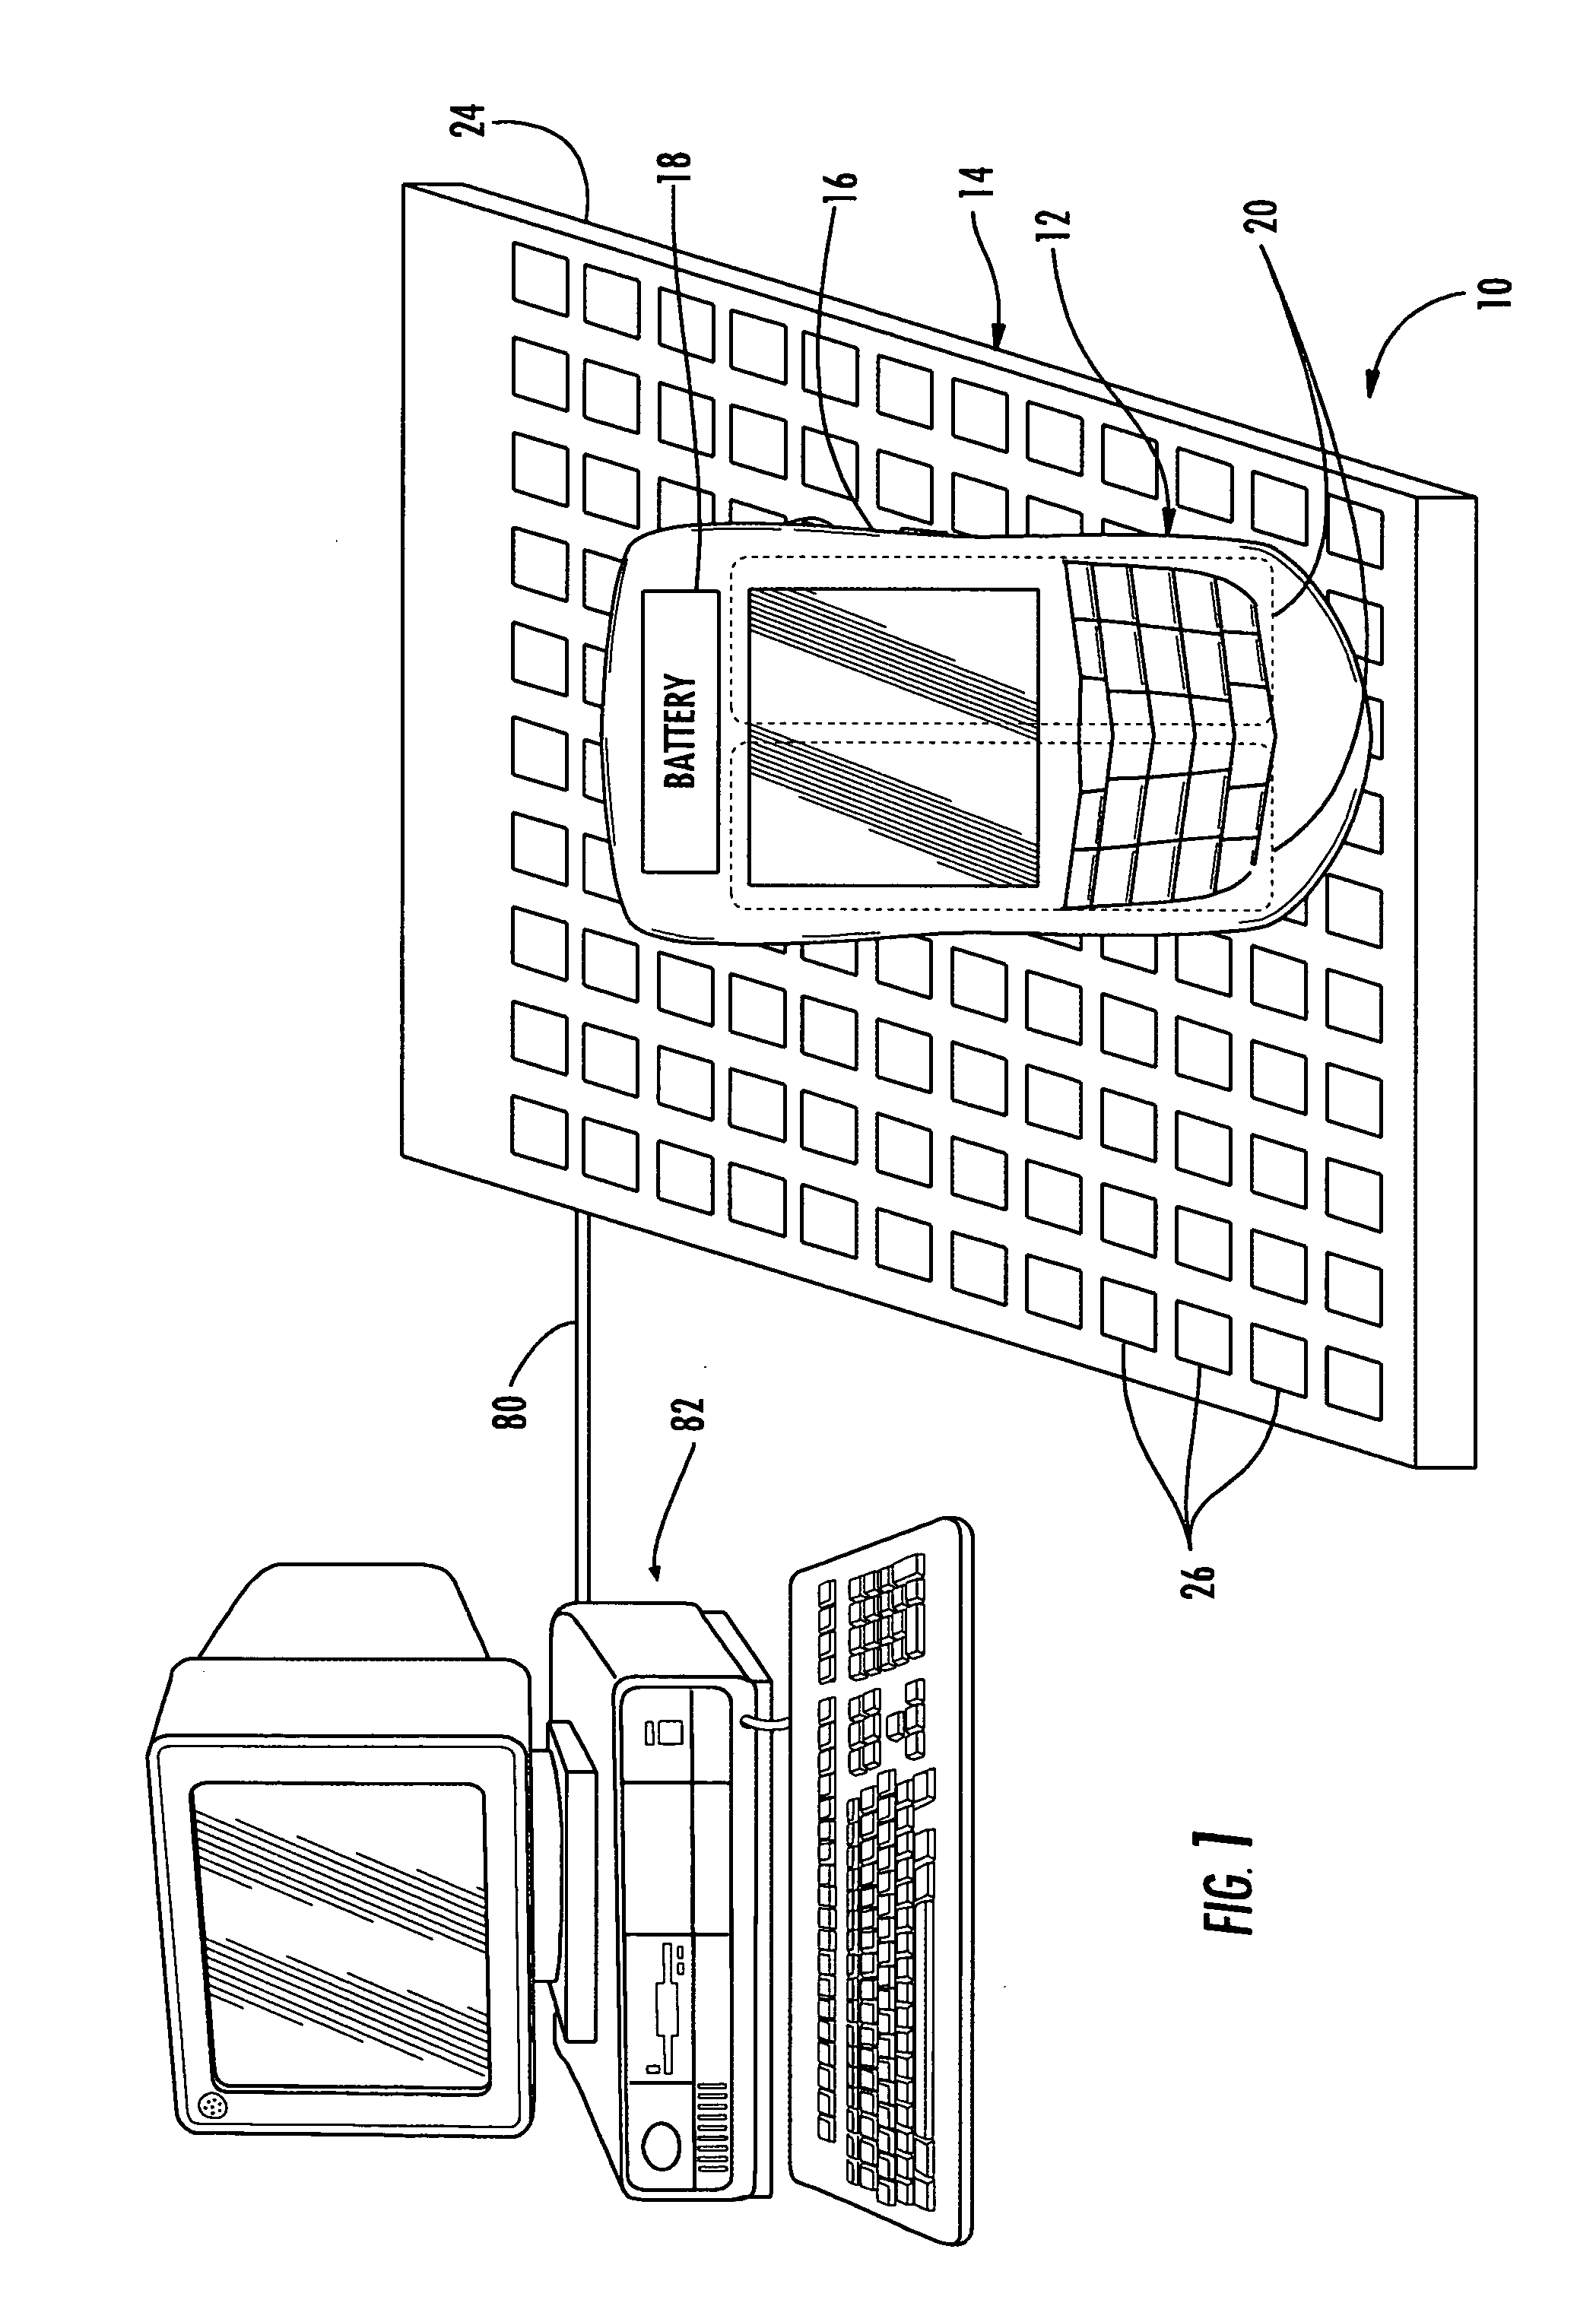 Portable electronic device and capacitive charger providing data transfer and associated methods